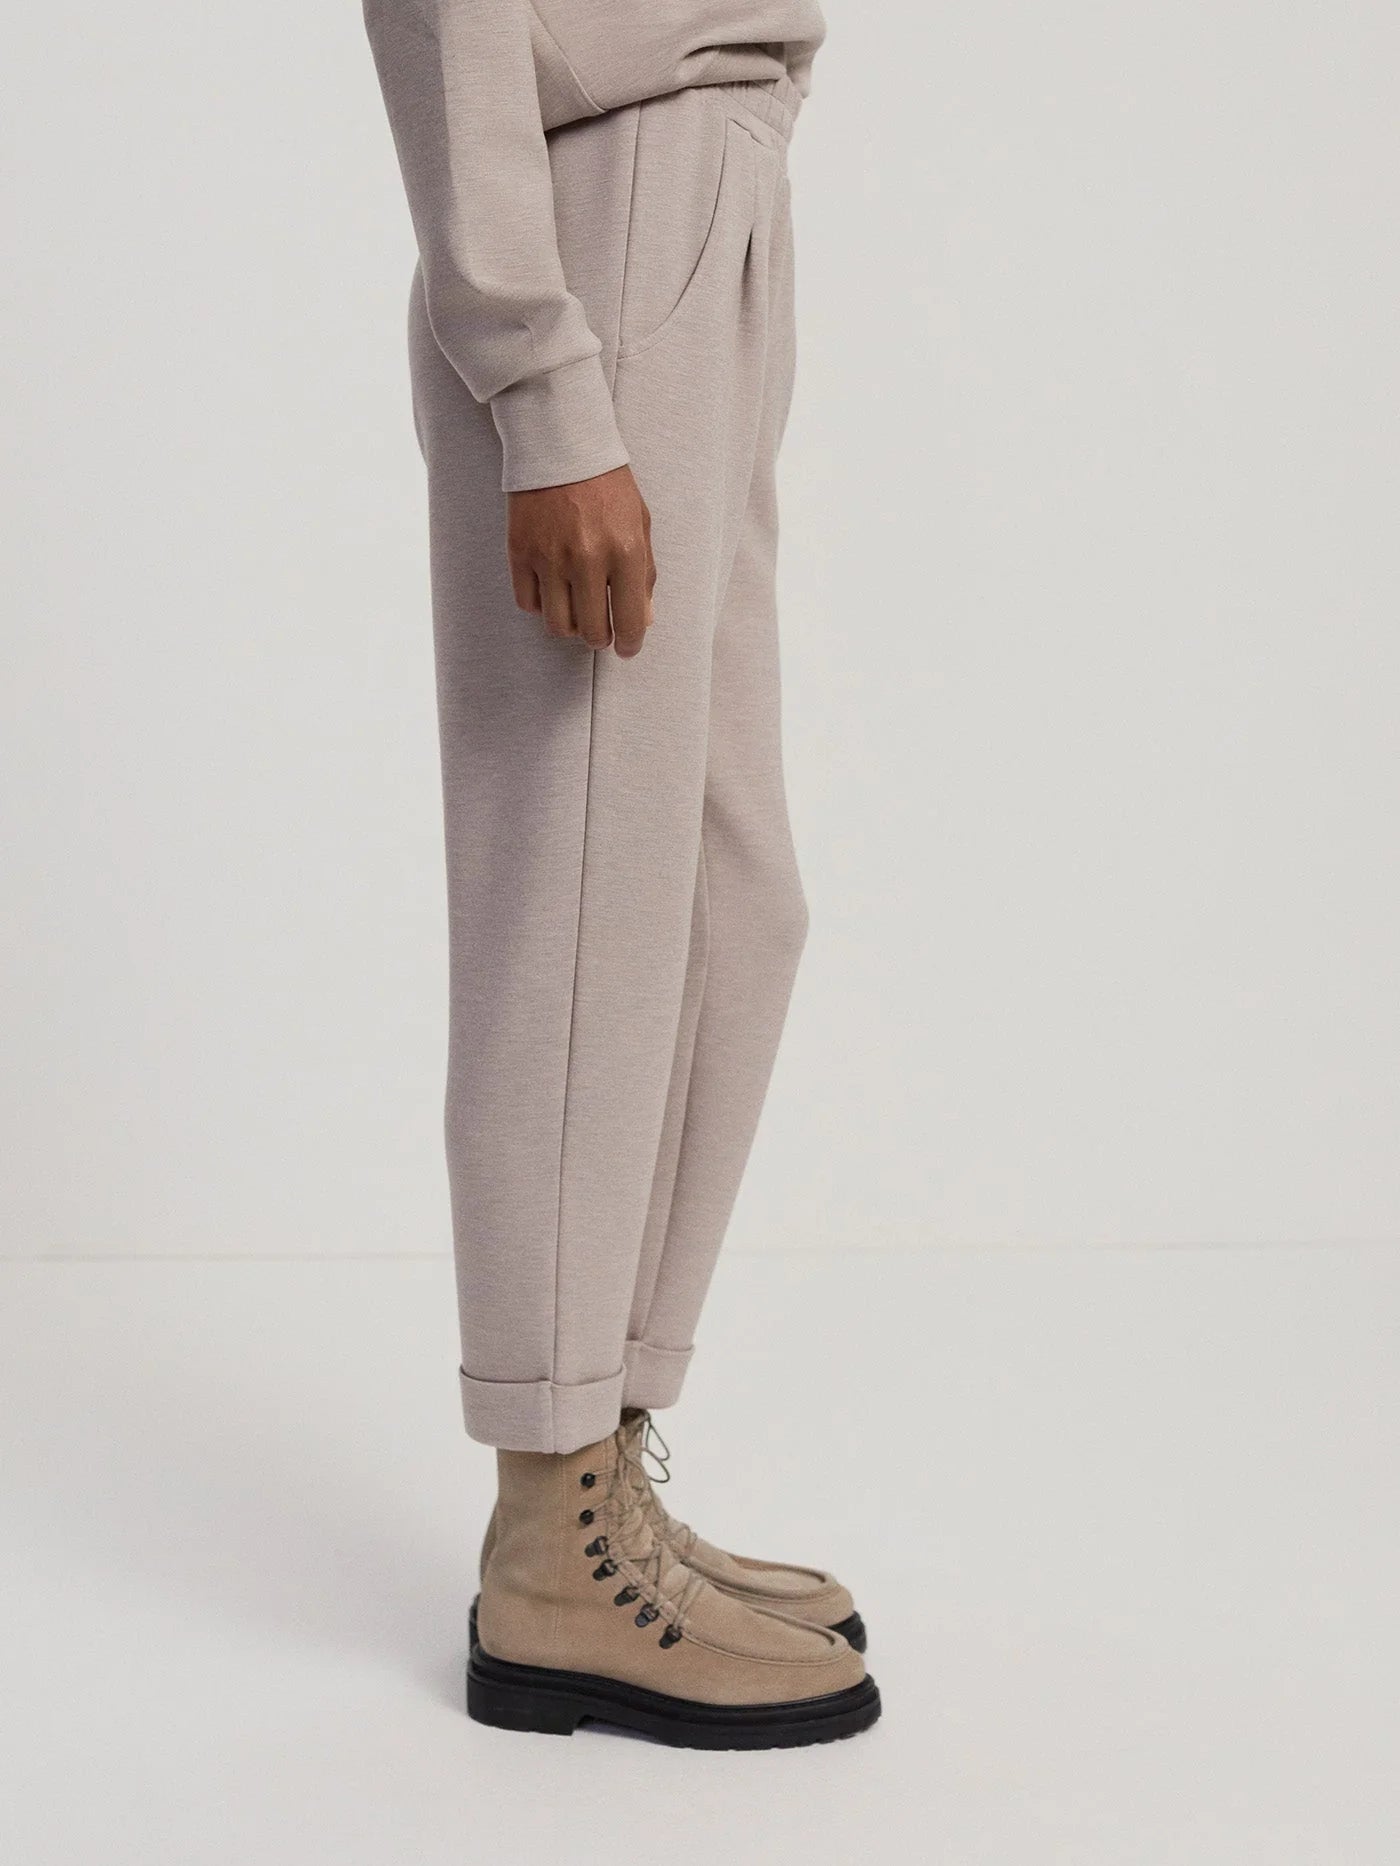 The Rolled Cuff Pant 25"